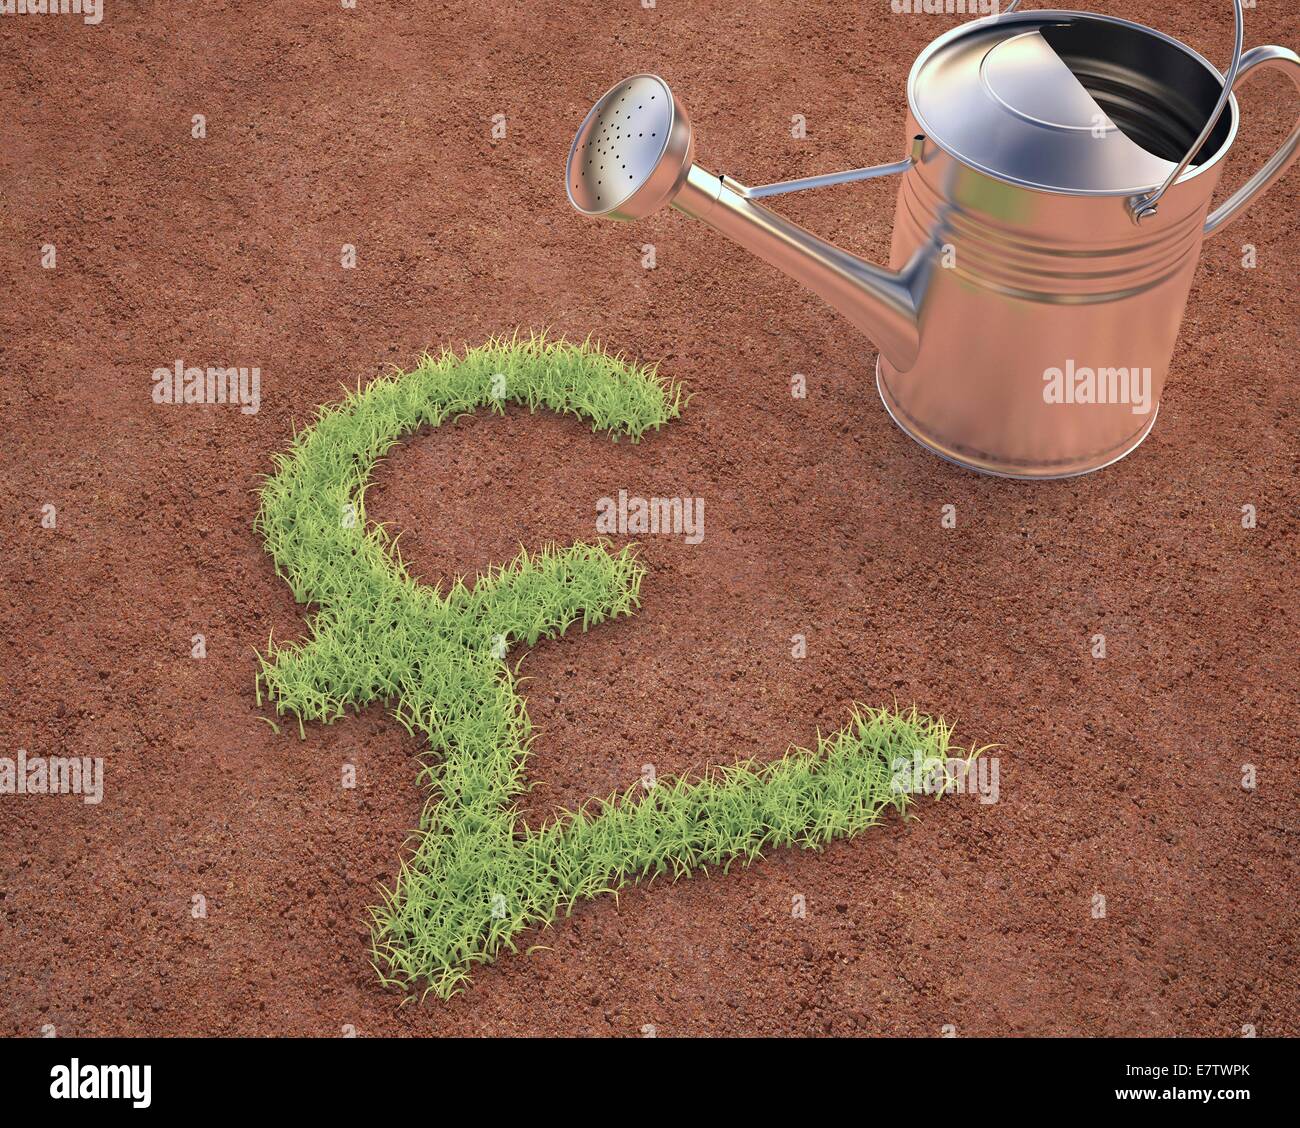 Pound sign and watering can, conceptual artwork. Stock Photo